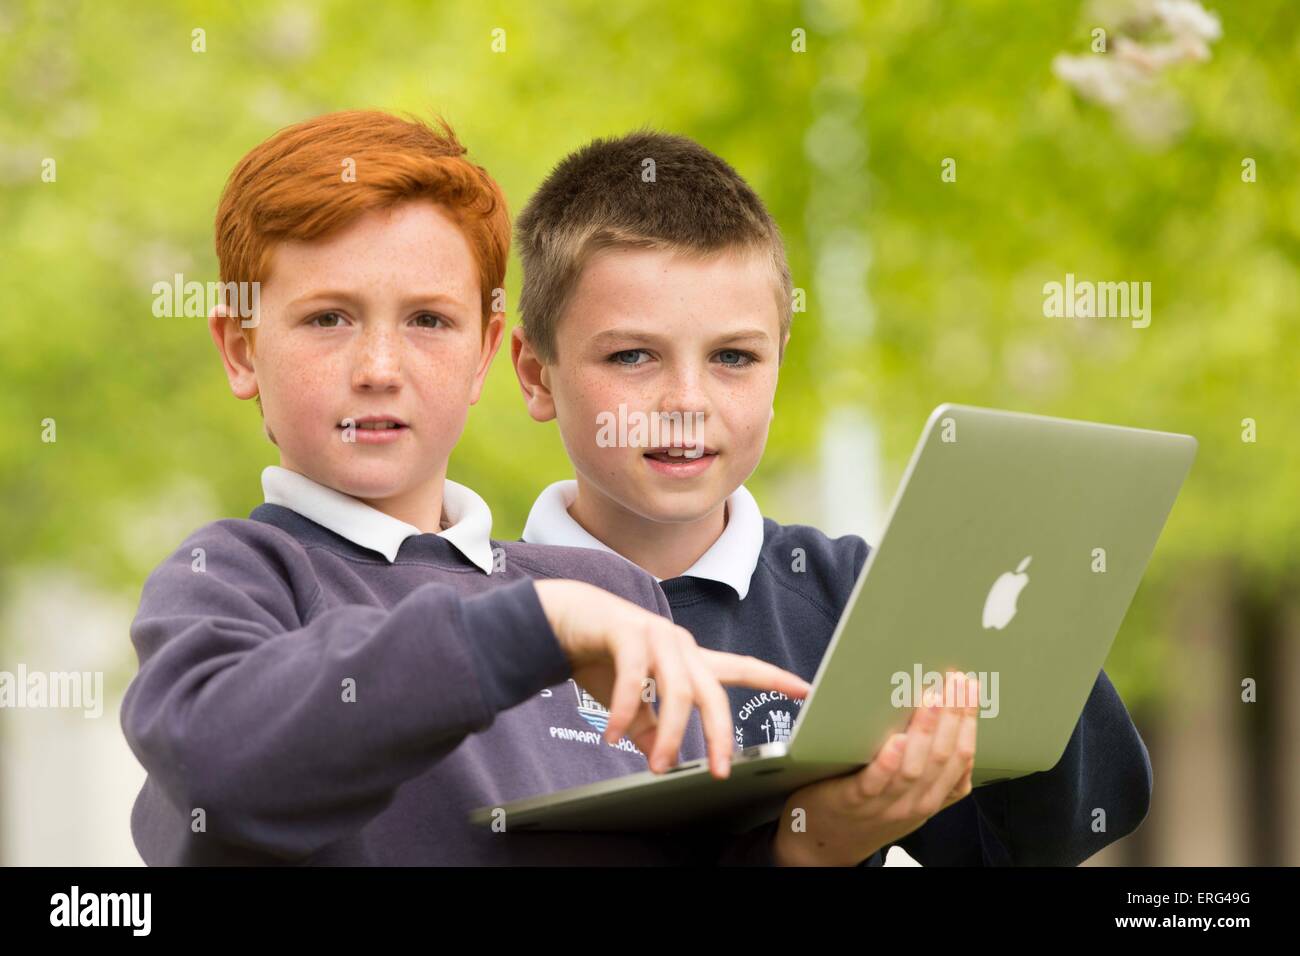 School children learning about technology and computers while outside using laptops. Stock Photo